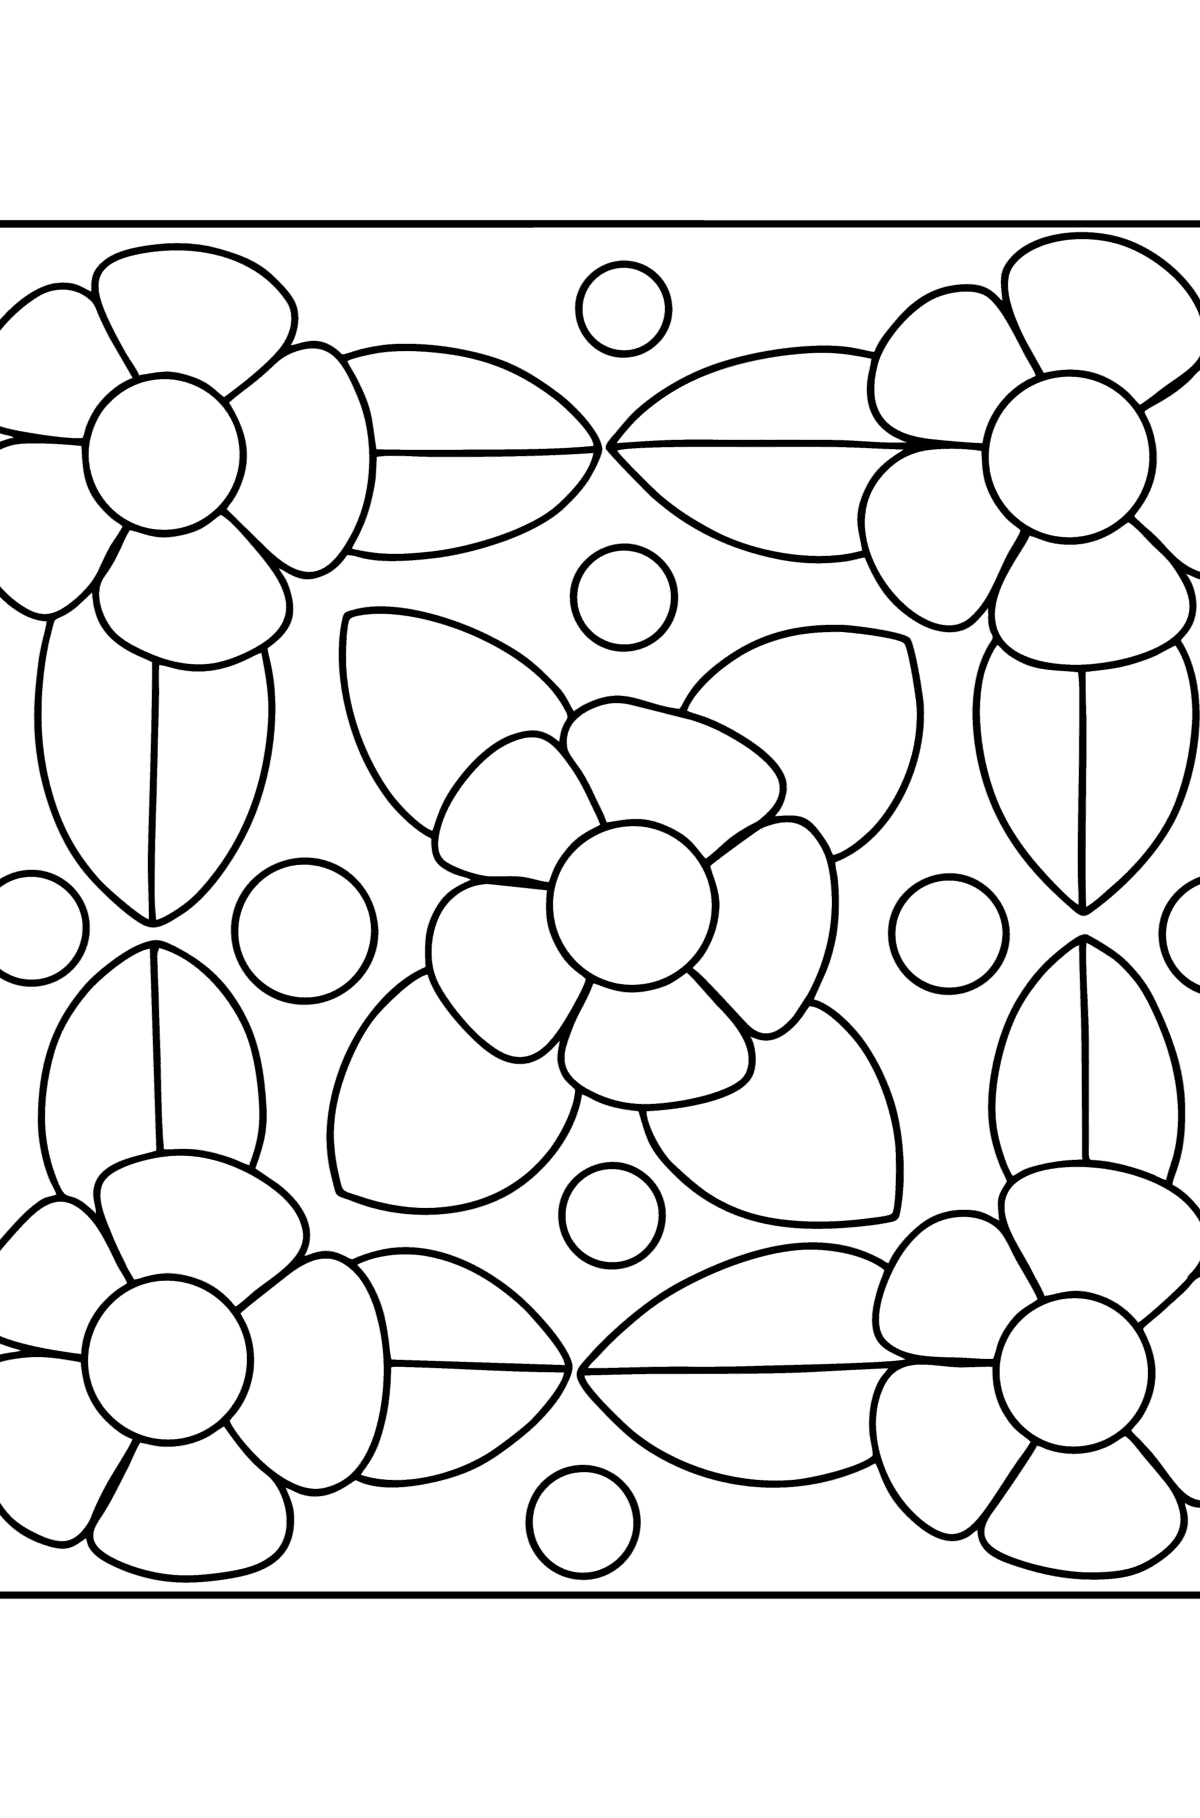 Difficult coloring pattern for kids - Coloring Pages for Kids